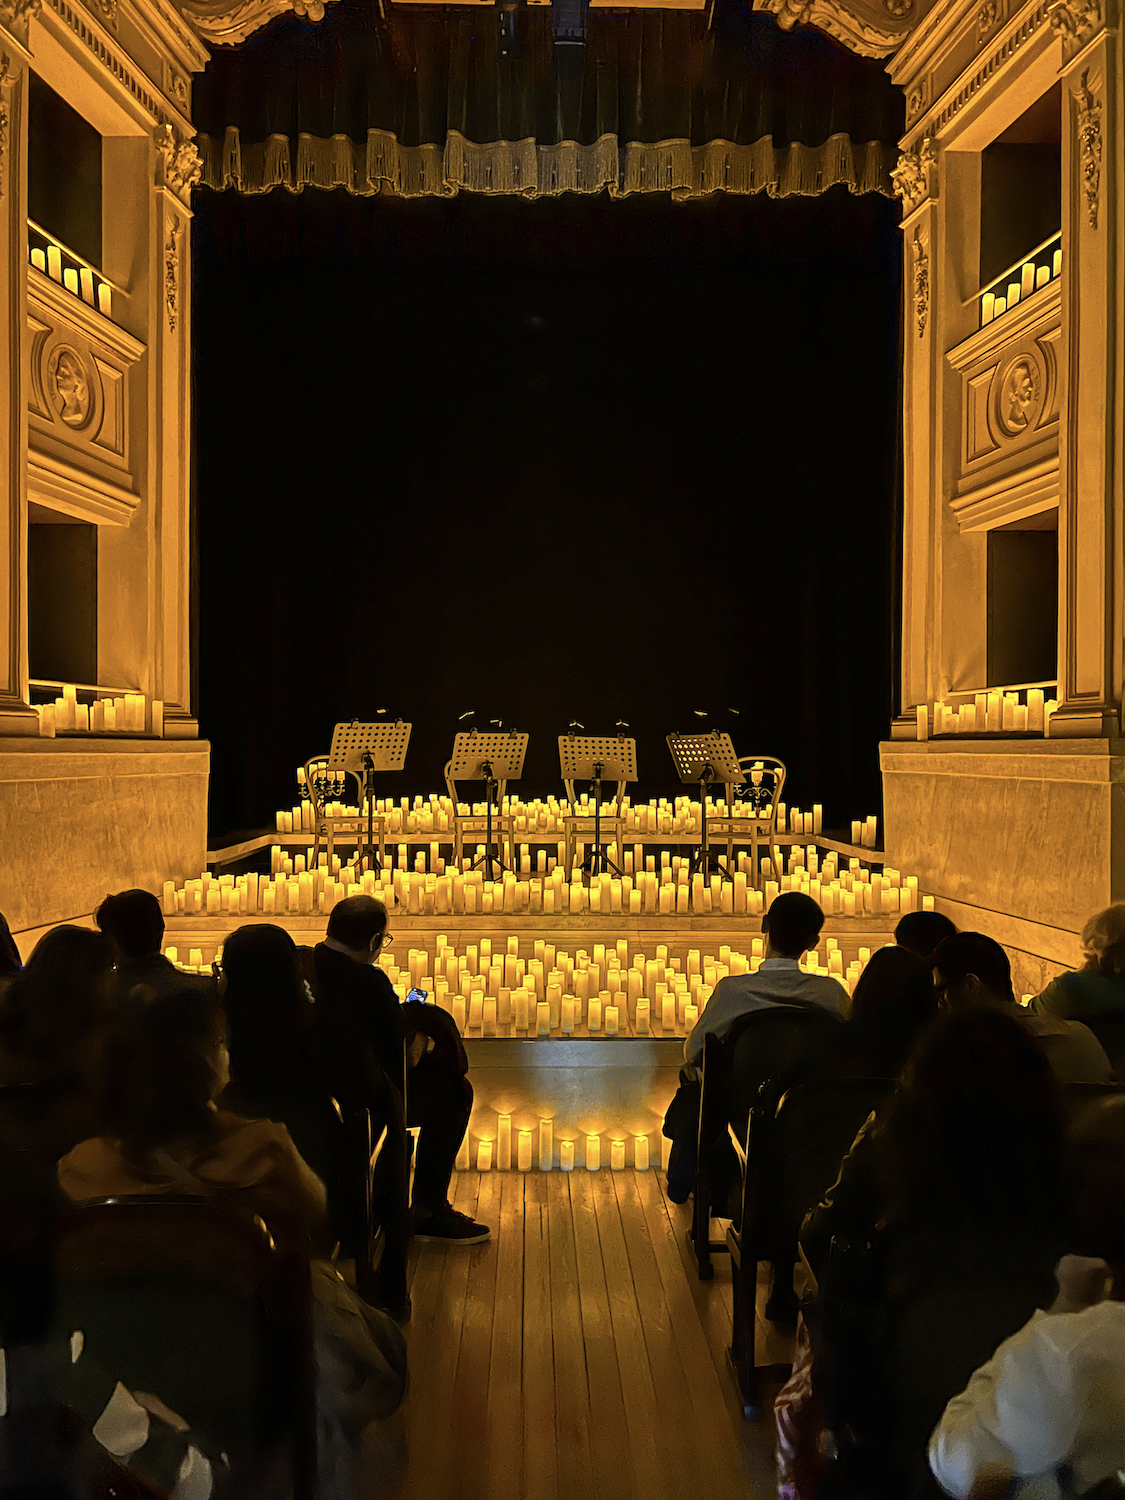 The Teatro Gerolamo was built in the 18th century as a marionette theater. Today, it is used for many intimate gatherings such as a candlelight concert